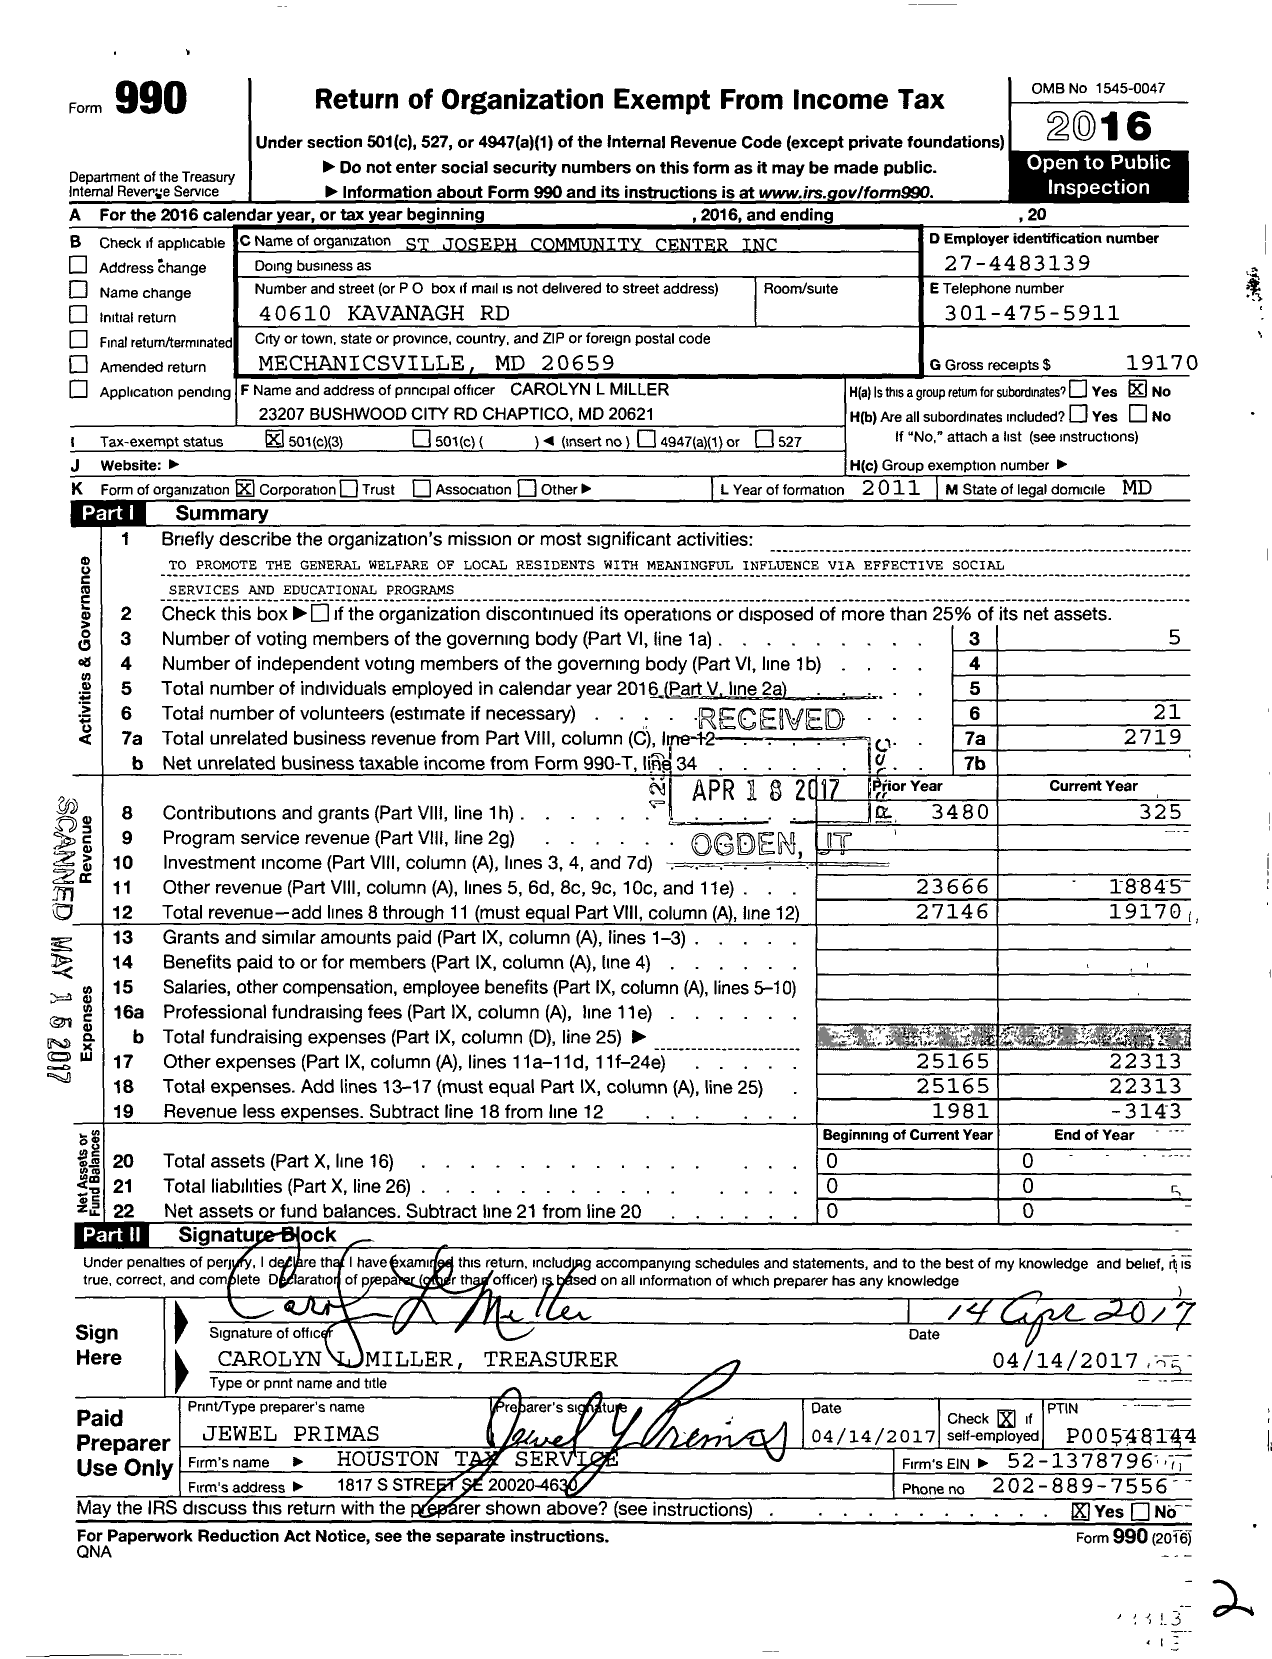 Image of first page of 2016 Form 990 for St Josephs Community Center